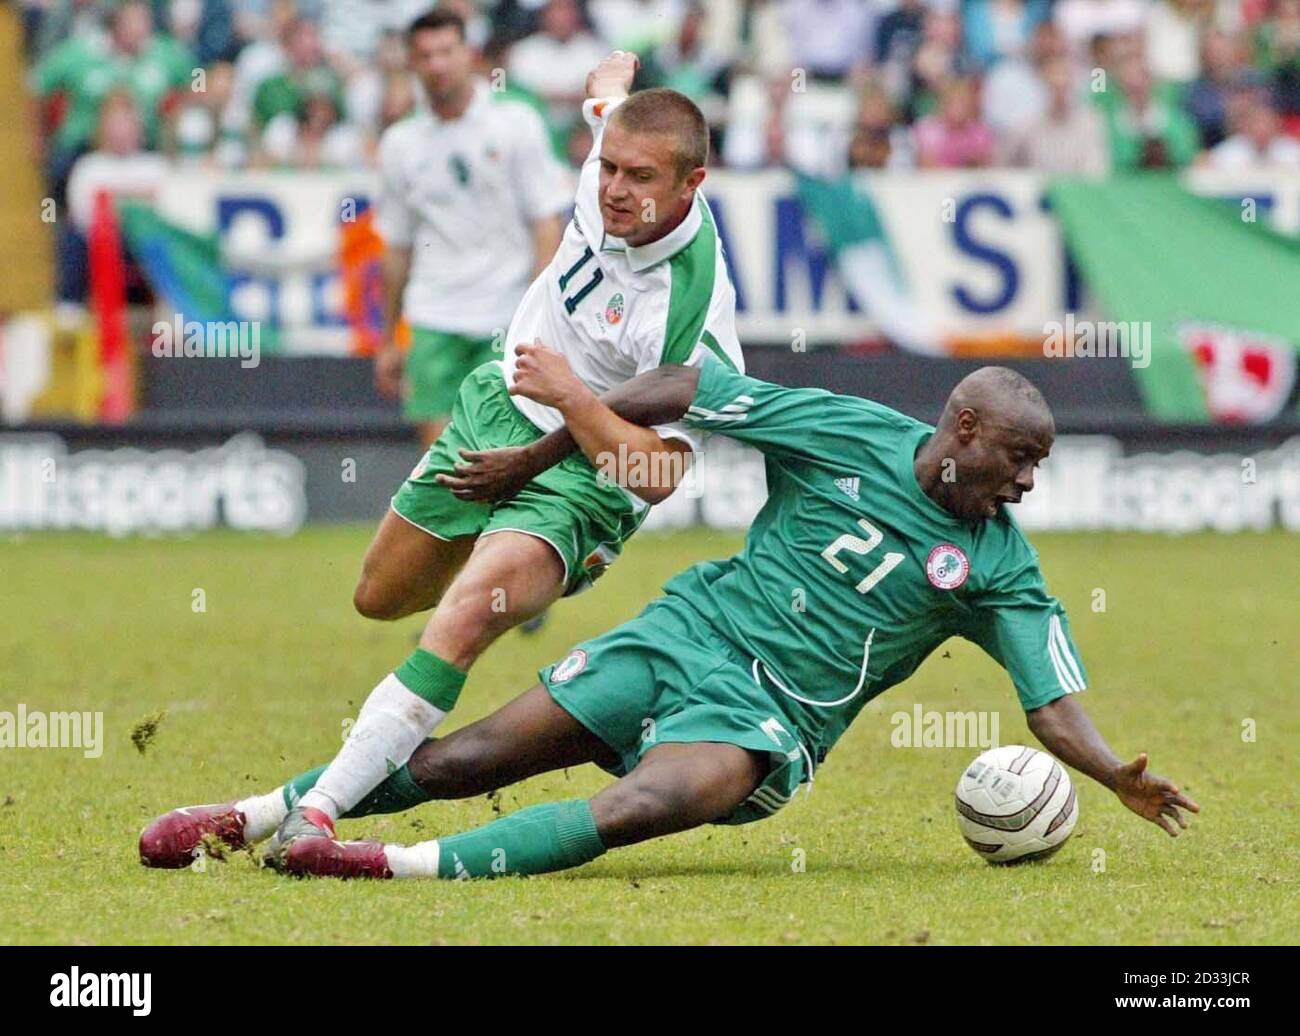 Republic of Ireland's Stephen McPhail (left) challenges Nigeria's Ifeanyi Ekwueme during the Unity Cup international friendly match at the Valley, Charlton. Stock Photo